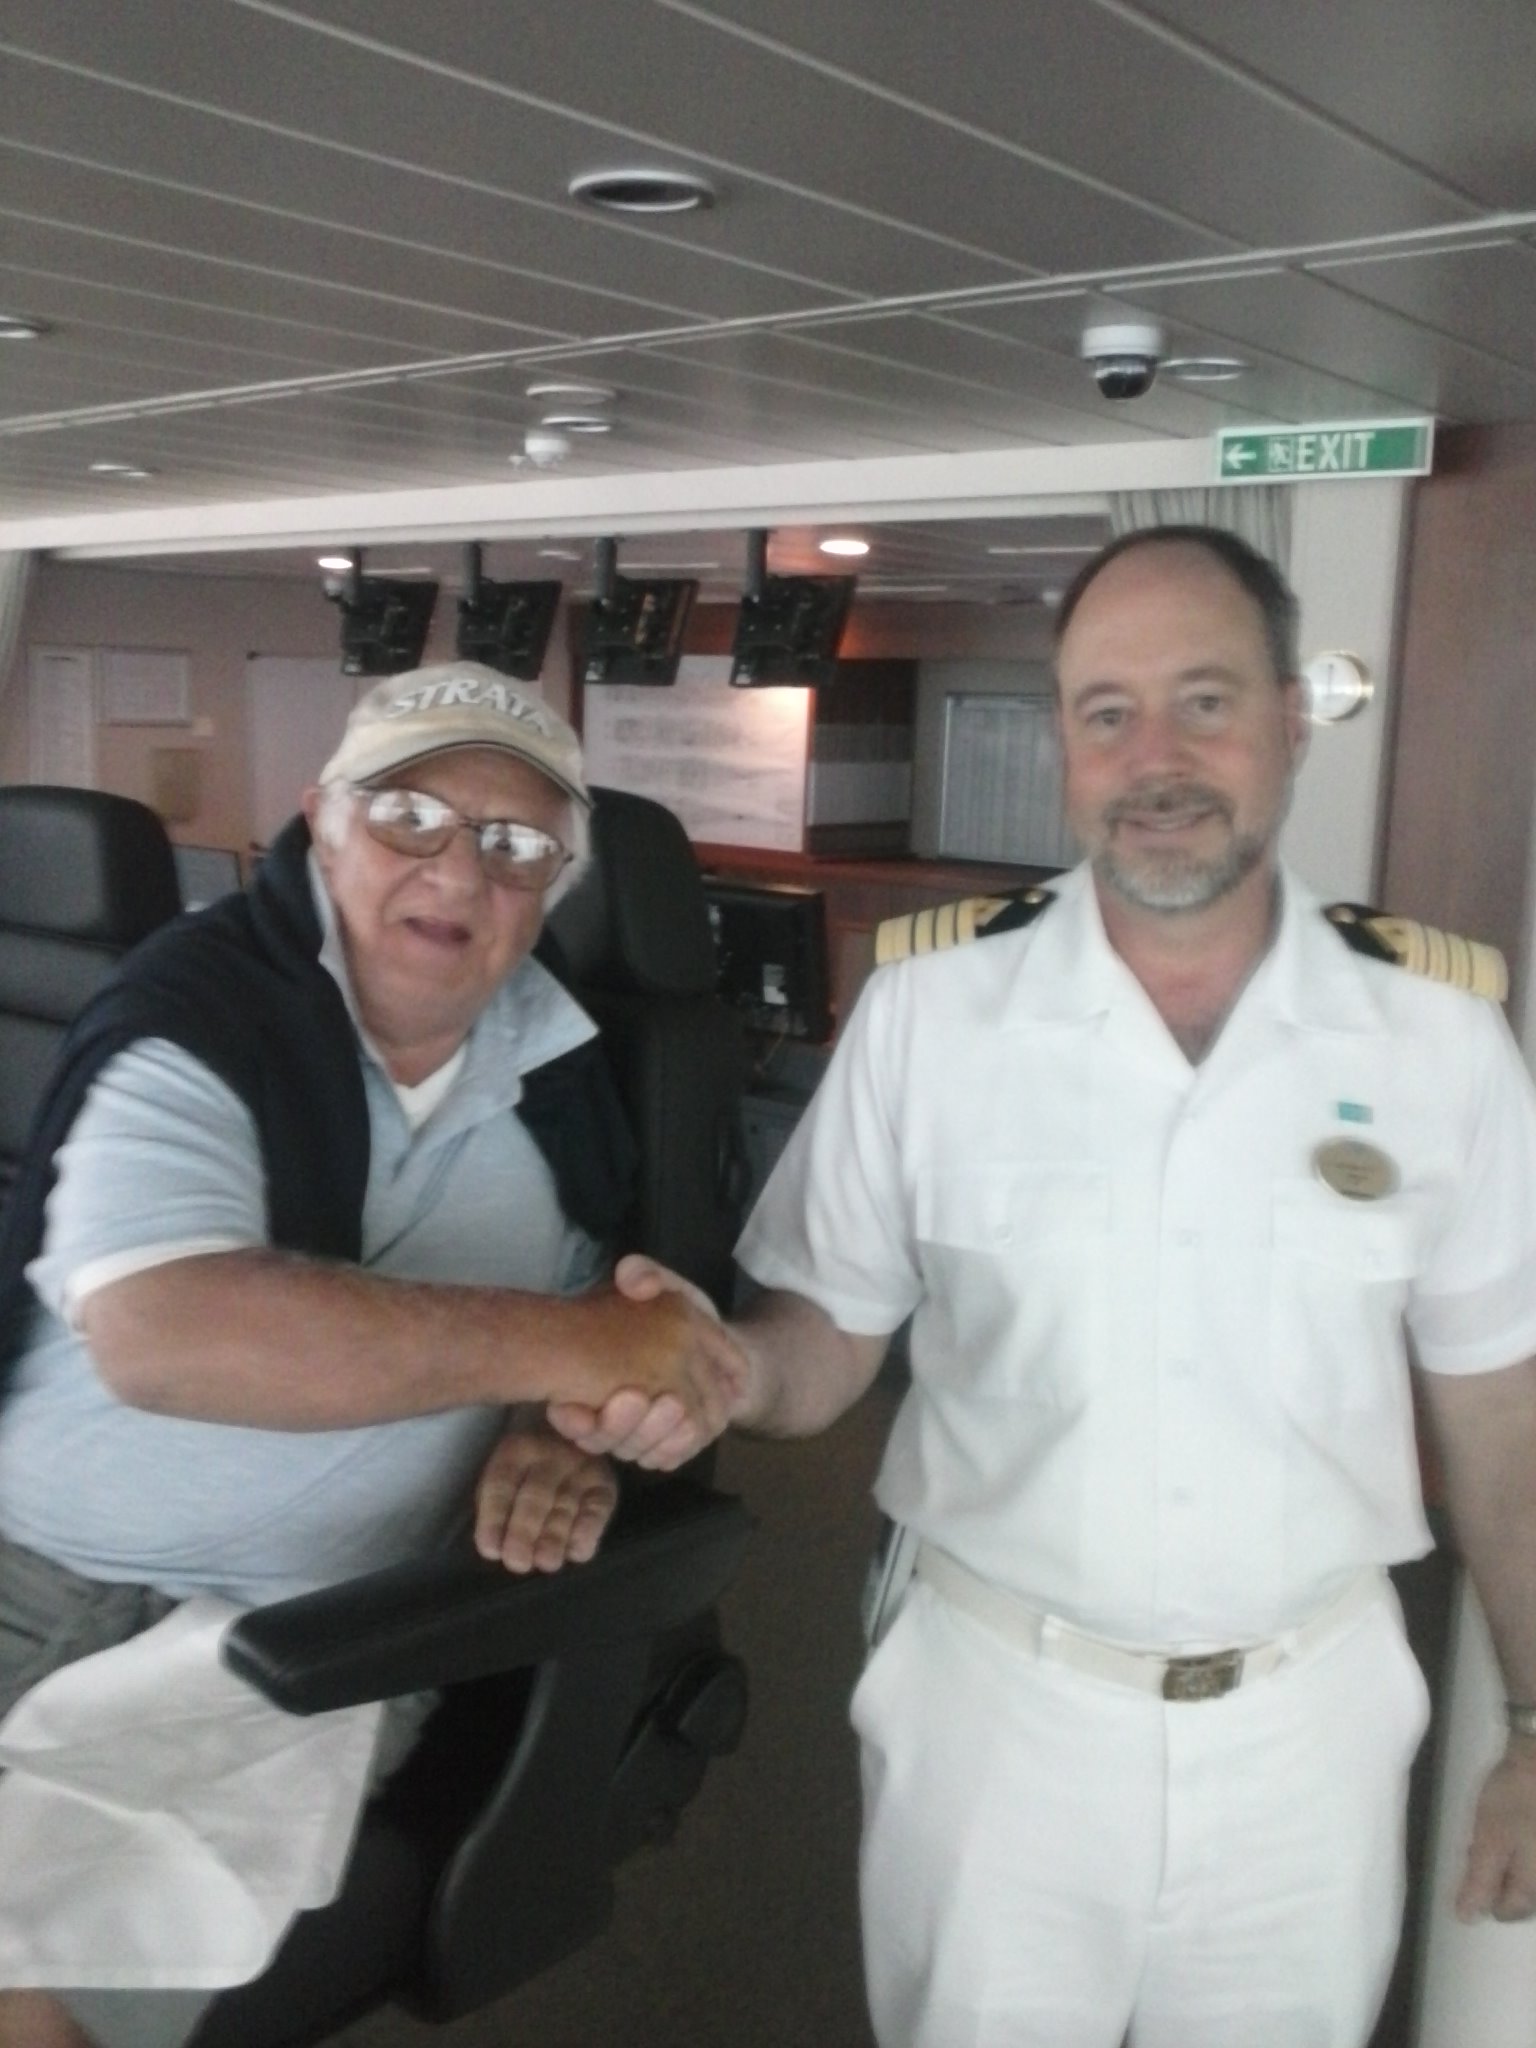 SITTING IN CAPTAIN'S CHAIR IN CONTROL WITH EL CAPITAN - ON SHIPS BRIDGE DECK OF THE BREAKAWAY 'S 6000 PASSENGERS AND CREW. SHIP